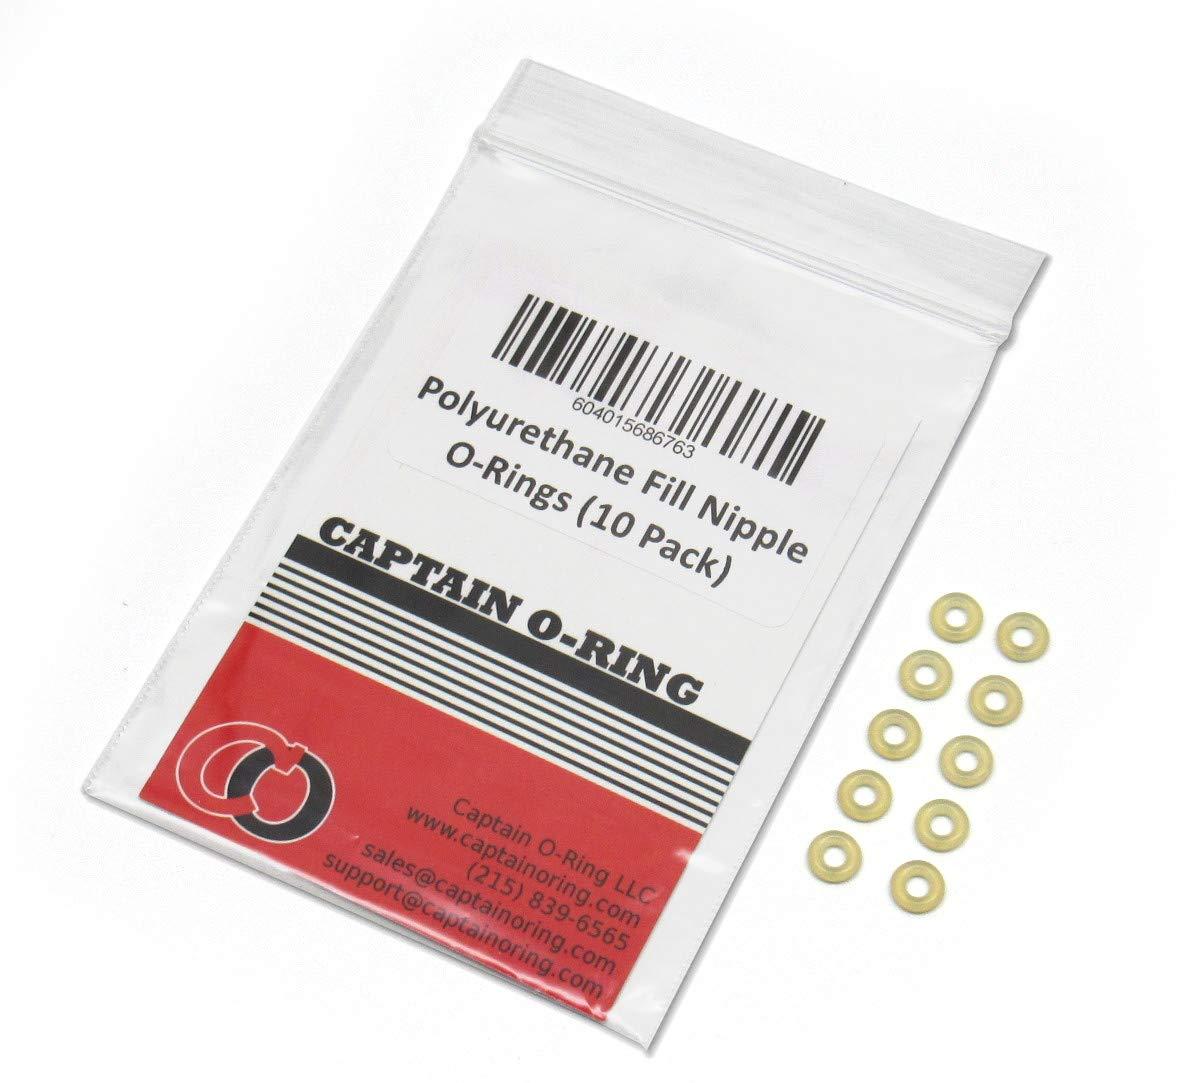 Captain O-Ring (10 Pack) Replacement Paintball Fill Nipple O-Rings (90  Durometer Polyurethane)